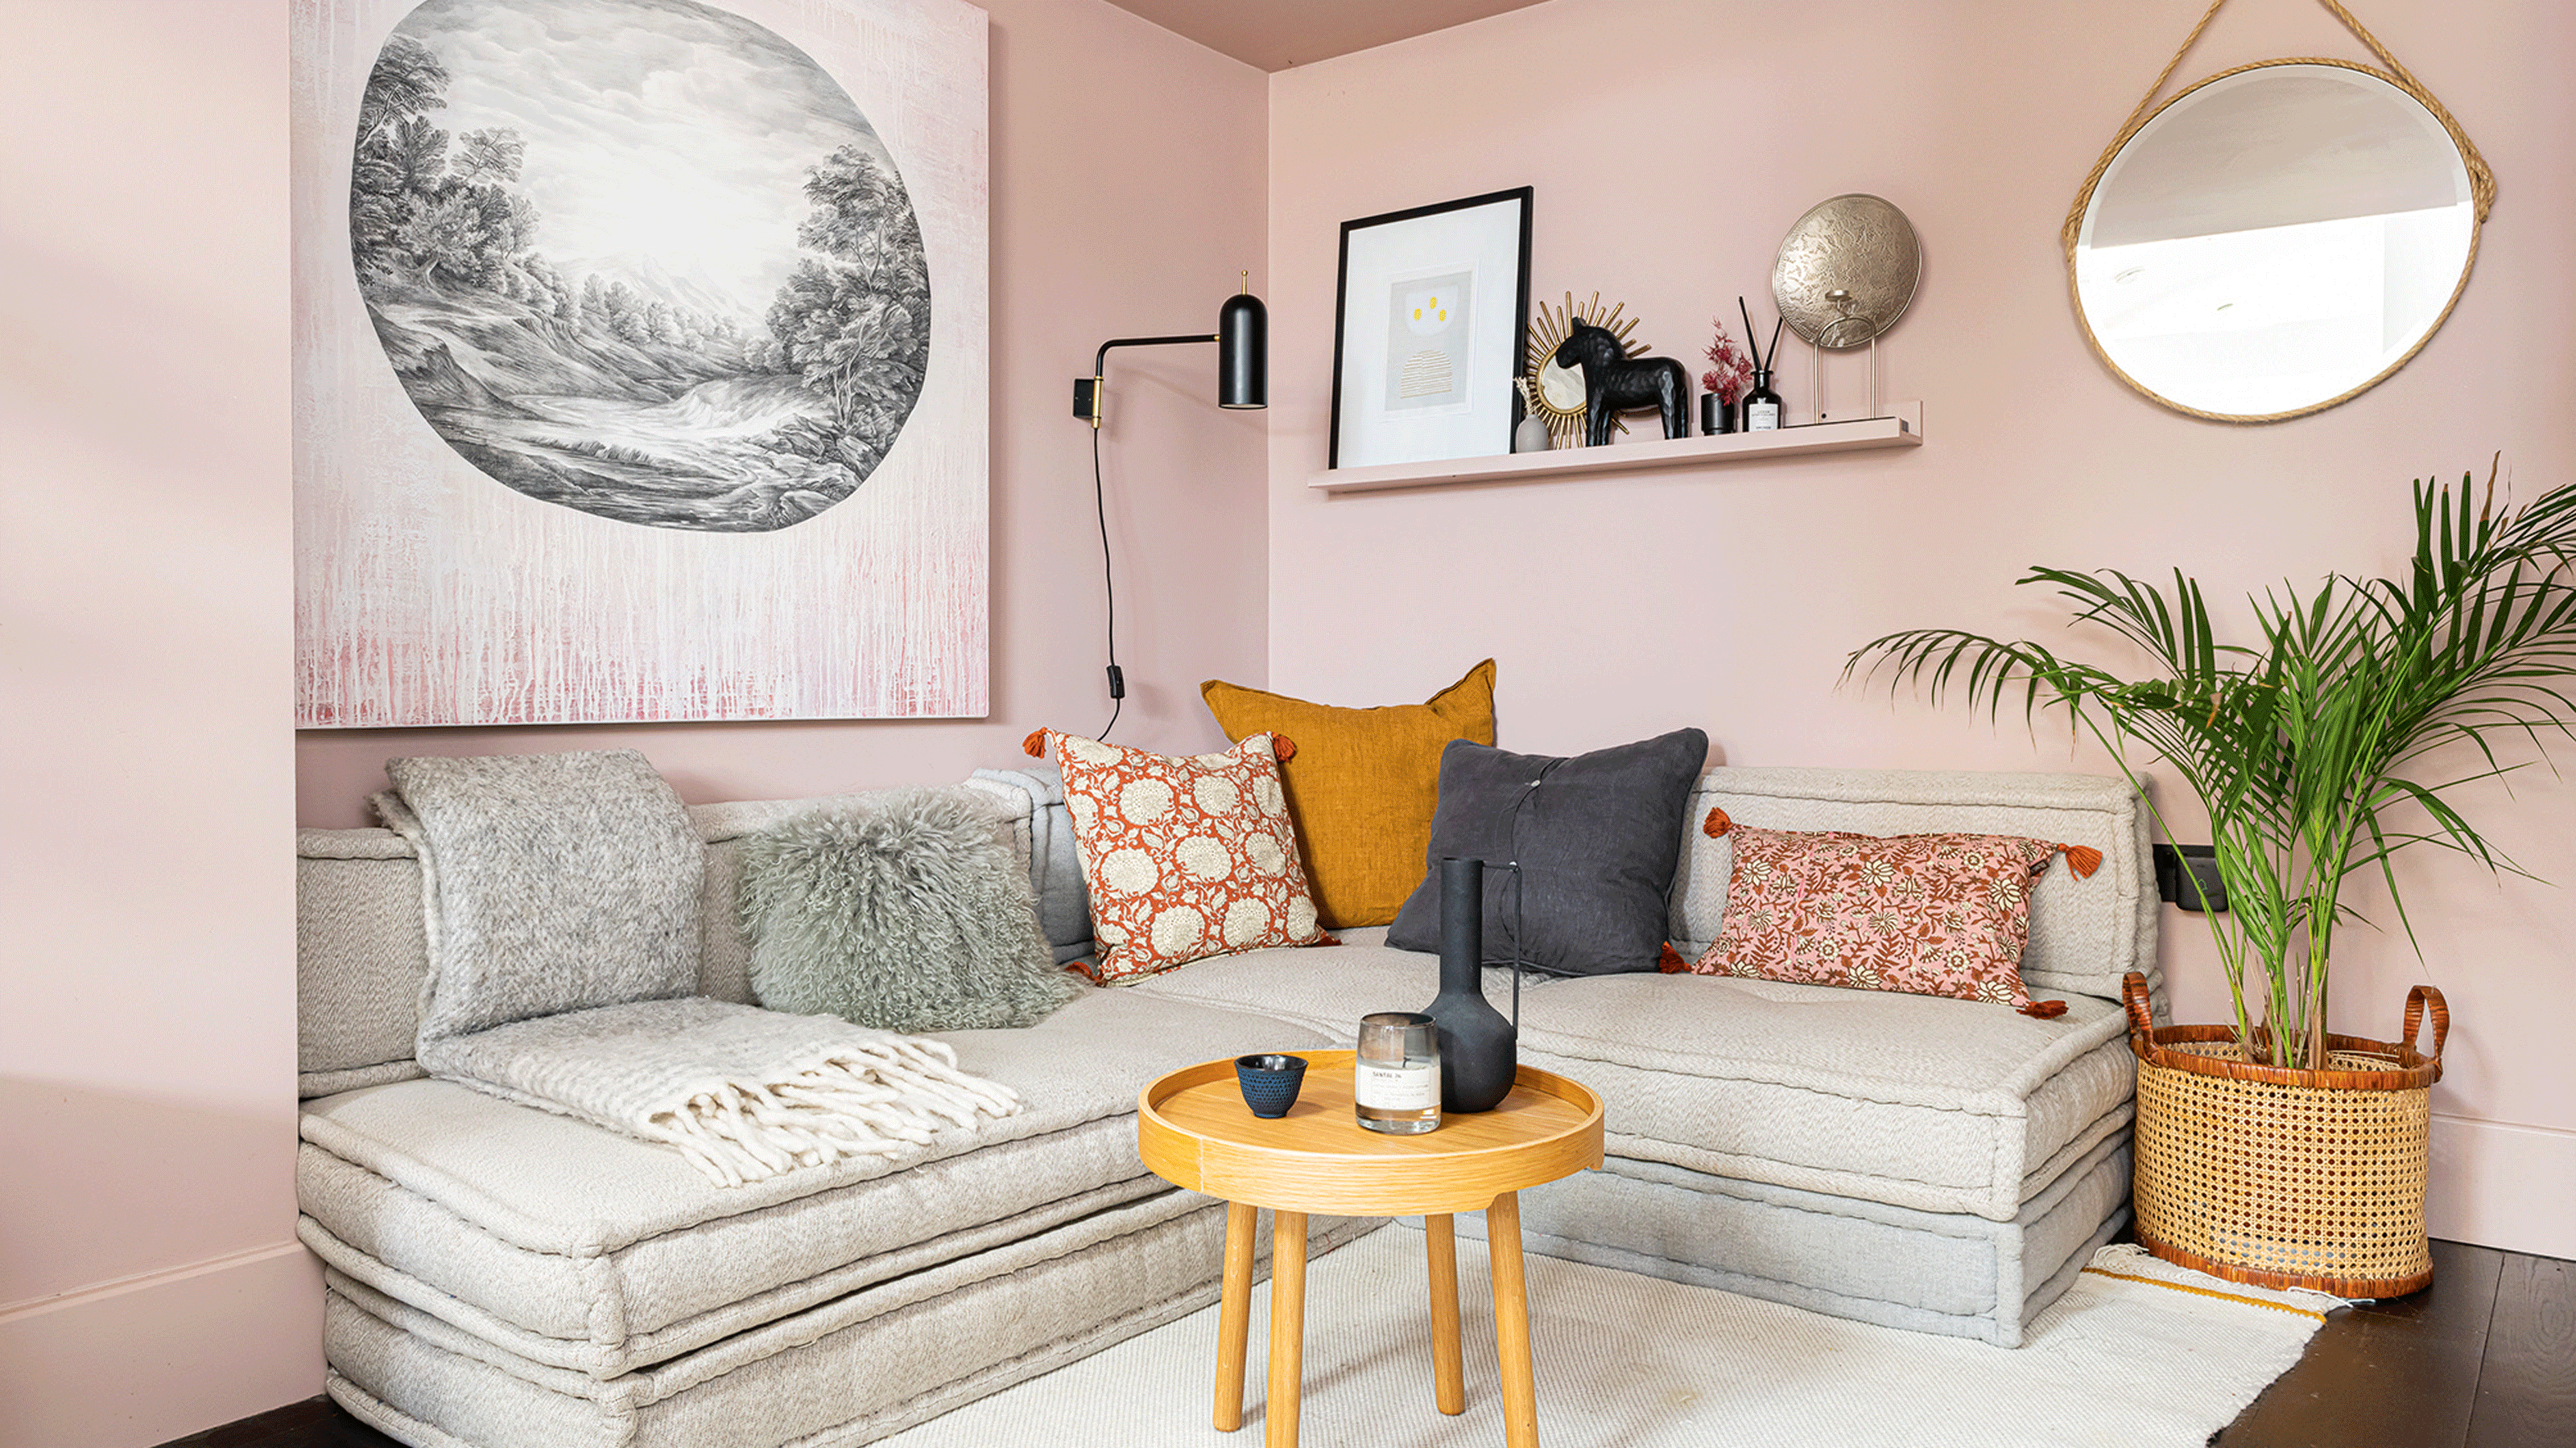 Small living room ideas - maximise a tiny space with these genius ...